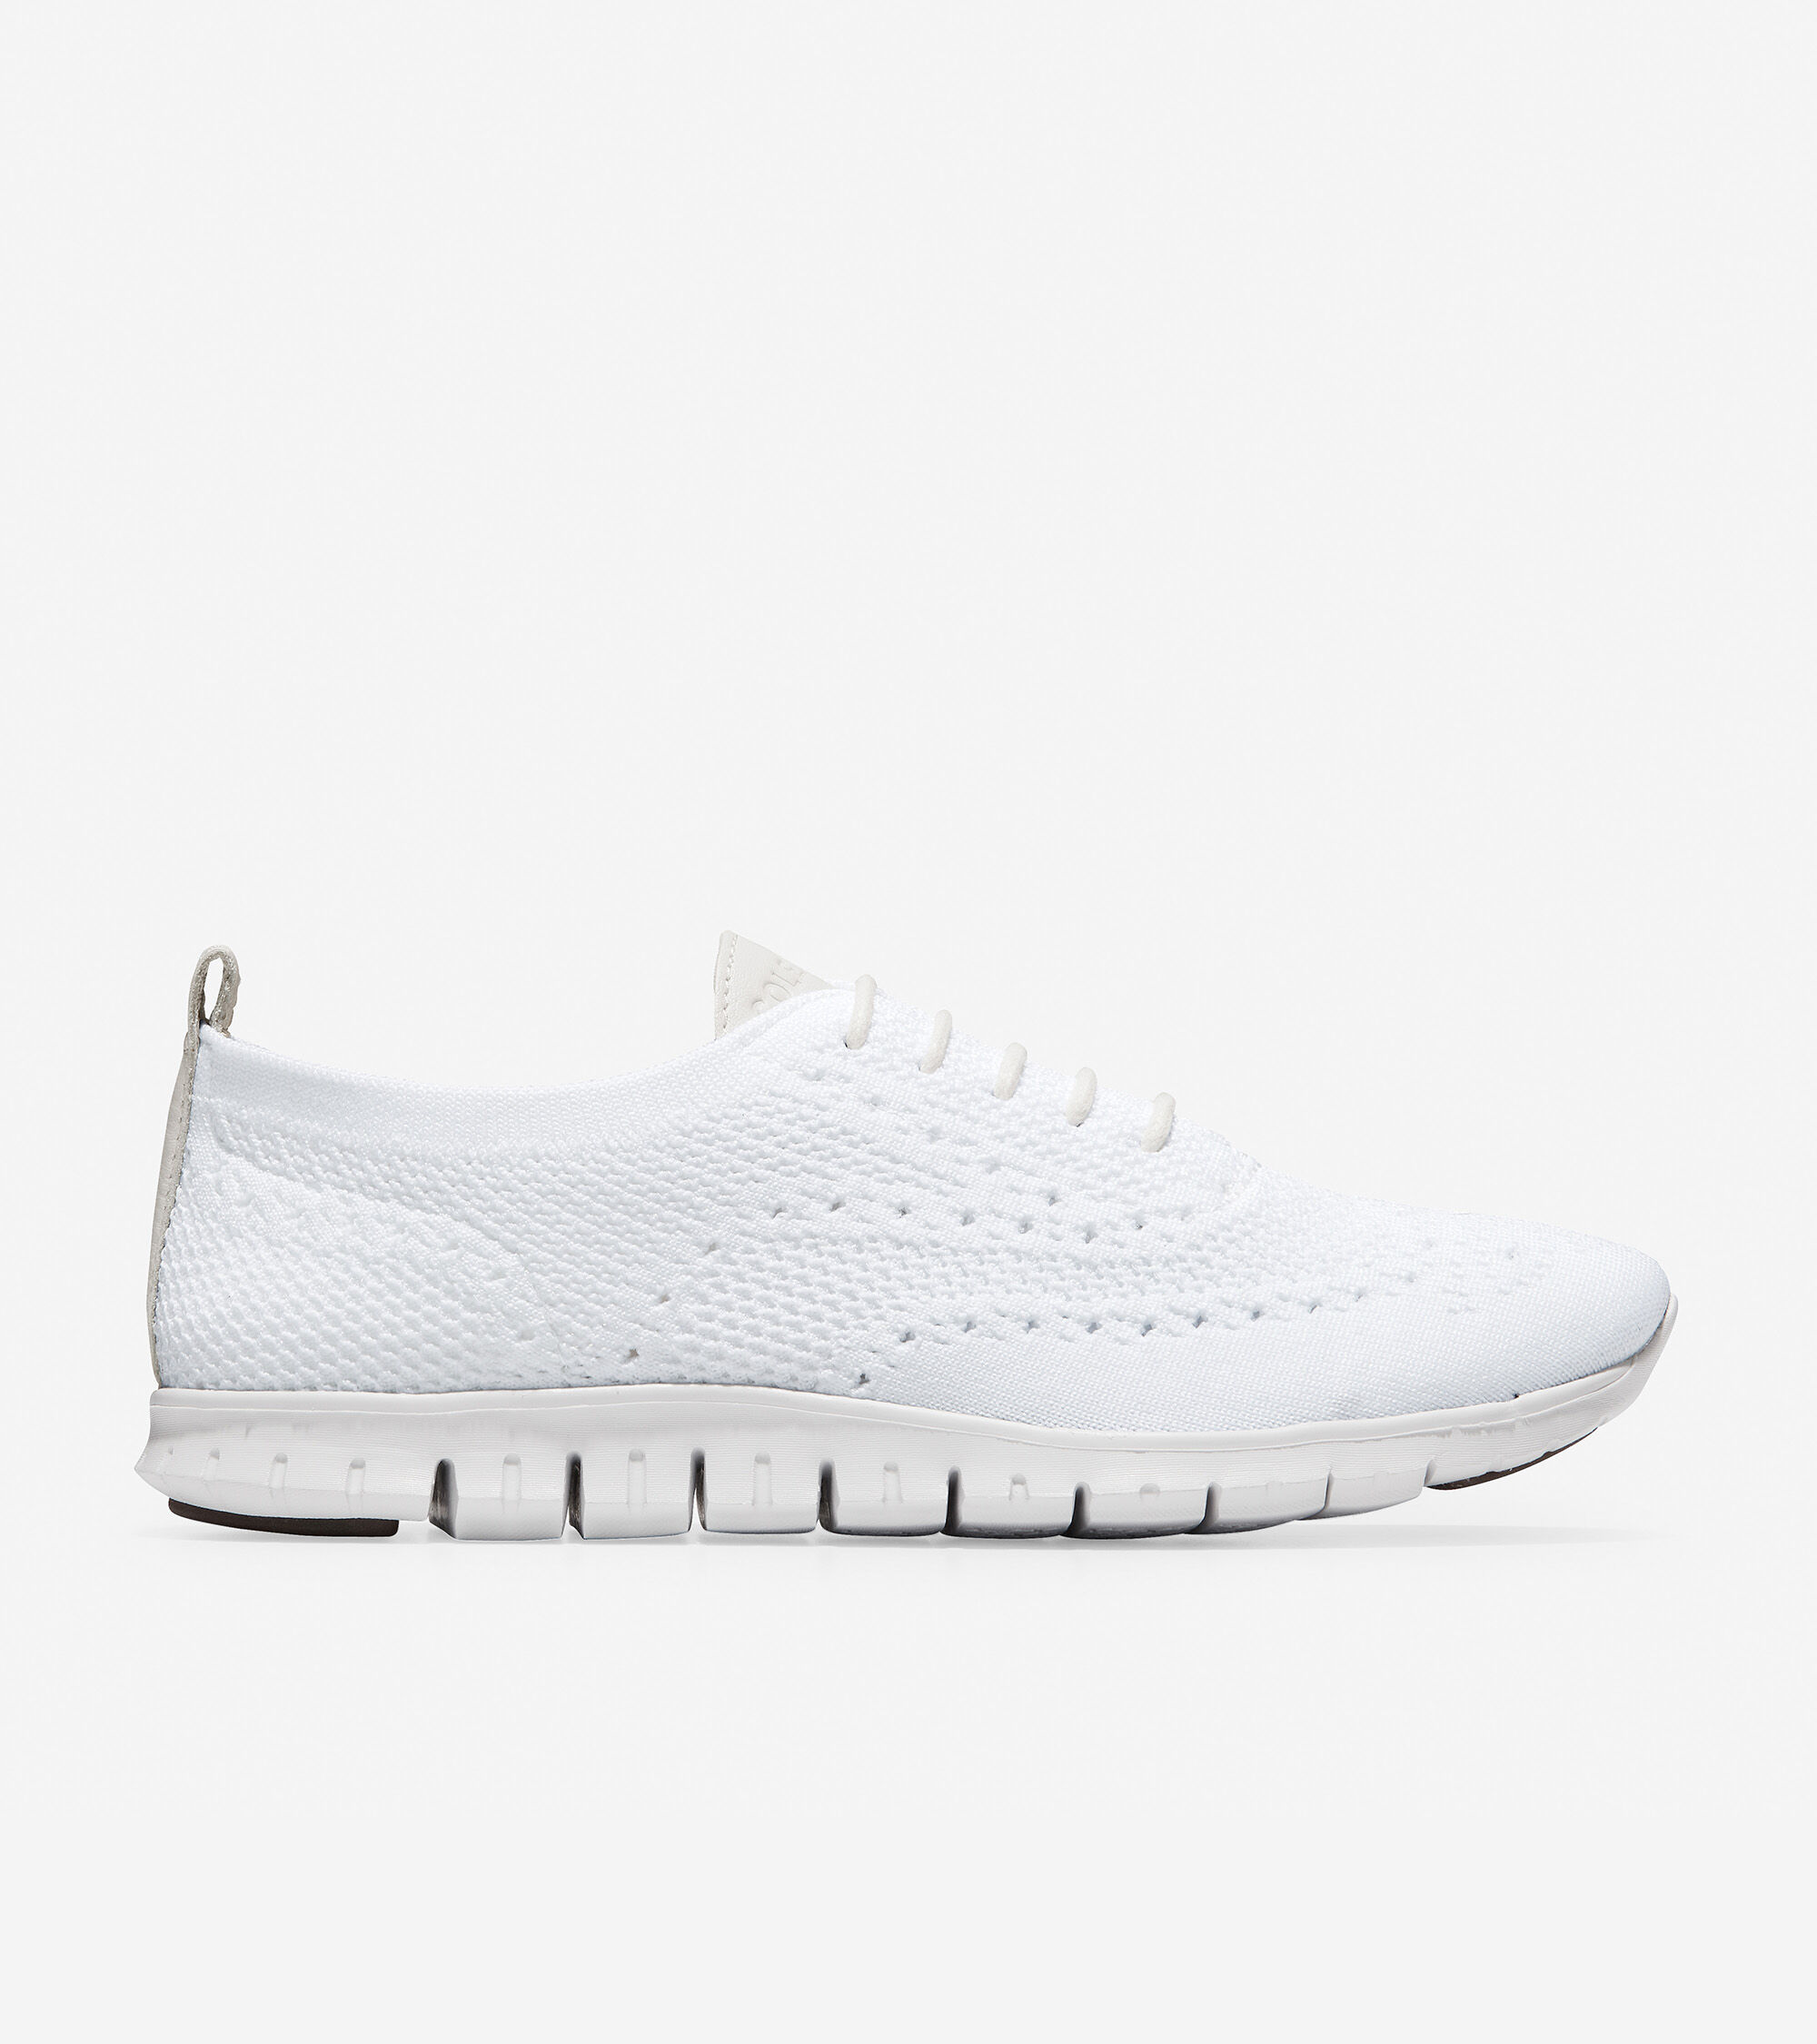 Details about   Cole Haan Women's Zerogrand All-Day Slip ON Stitchlite White Sneaker Shoes